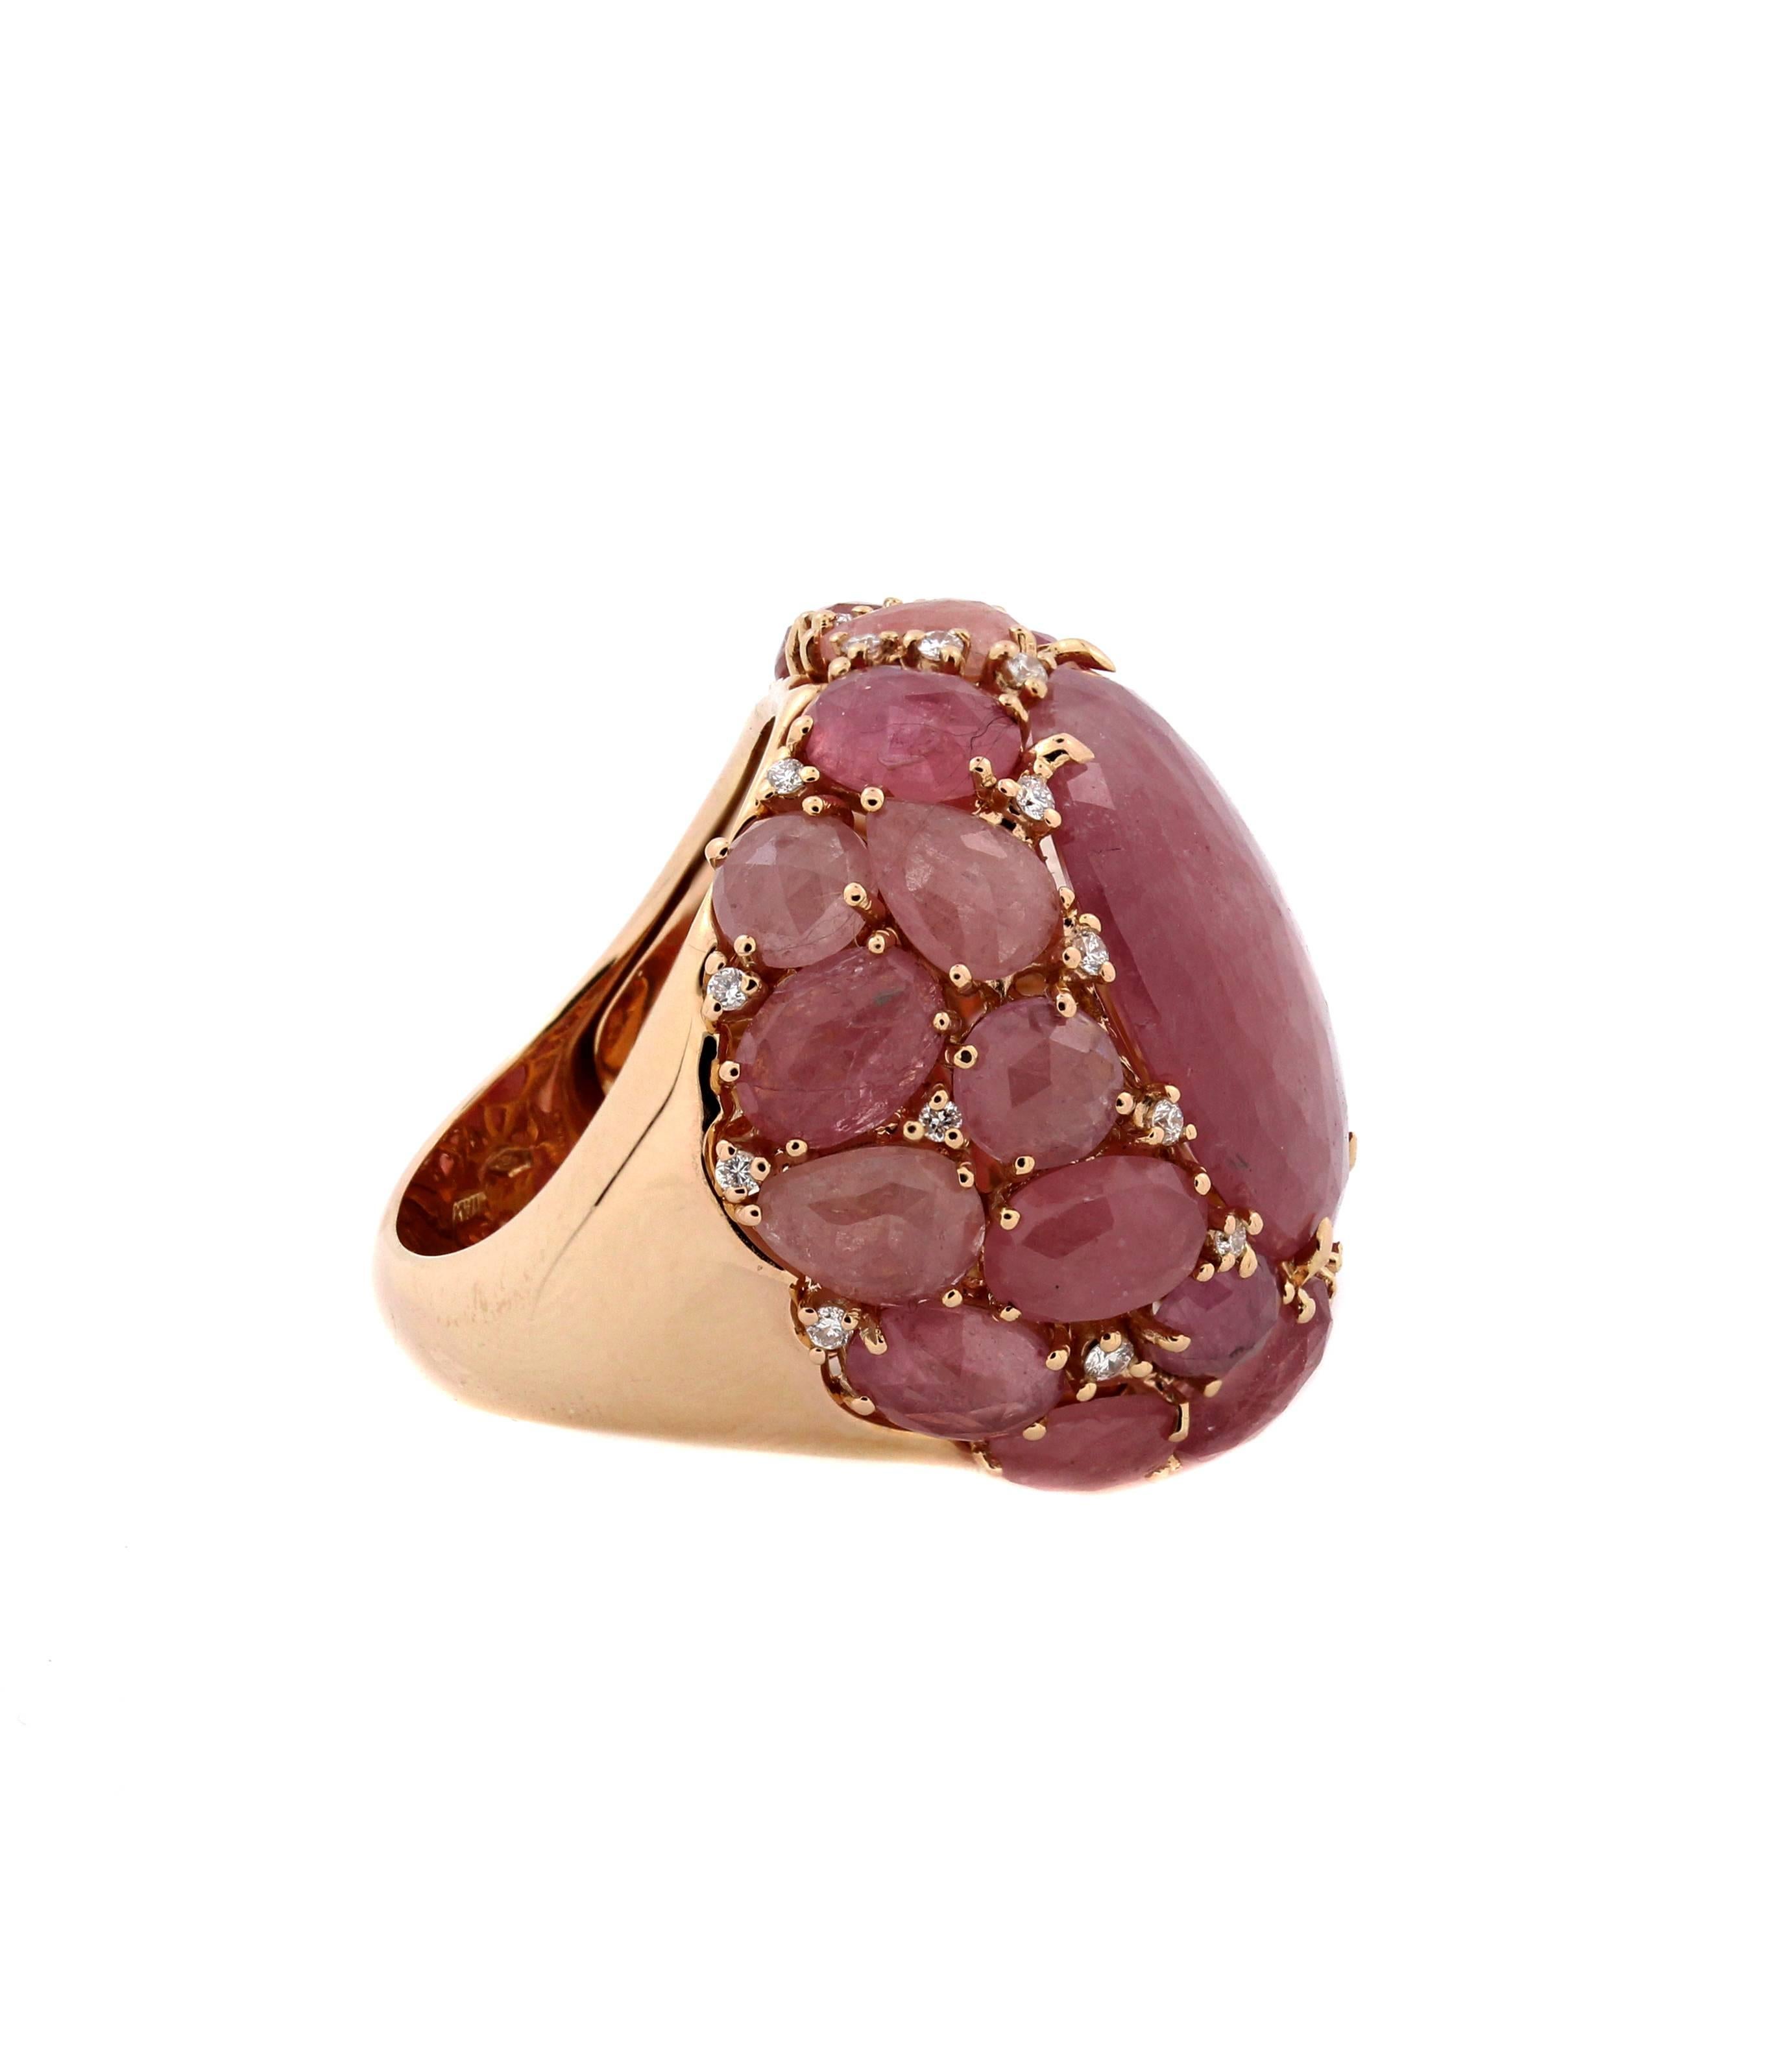 18K Gold Ring with cabochon cut Pink sapphires and diamonds by Giovanni Ferraris

This gorgeous ring features special-cut pink sapphires that are cabochon cut. Each stone was specifically cut to fit in its exact spot on this ring. There are also a